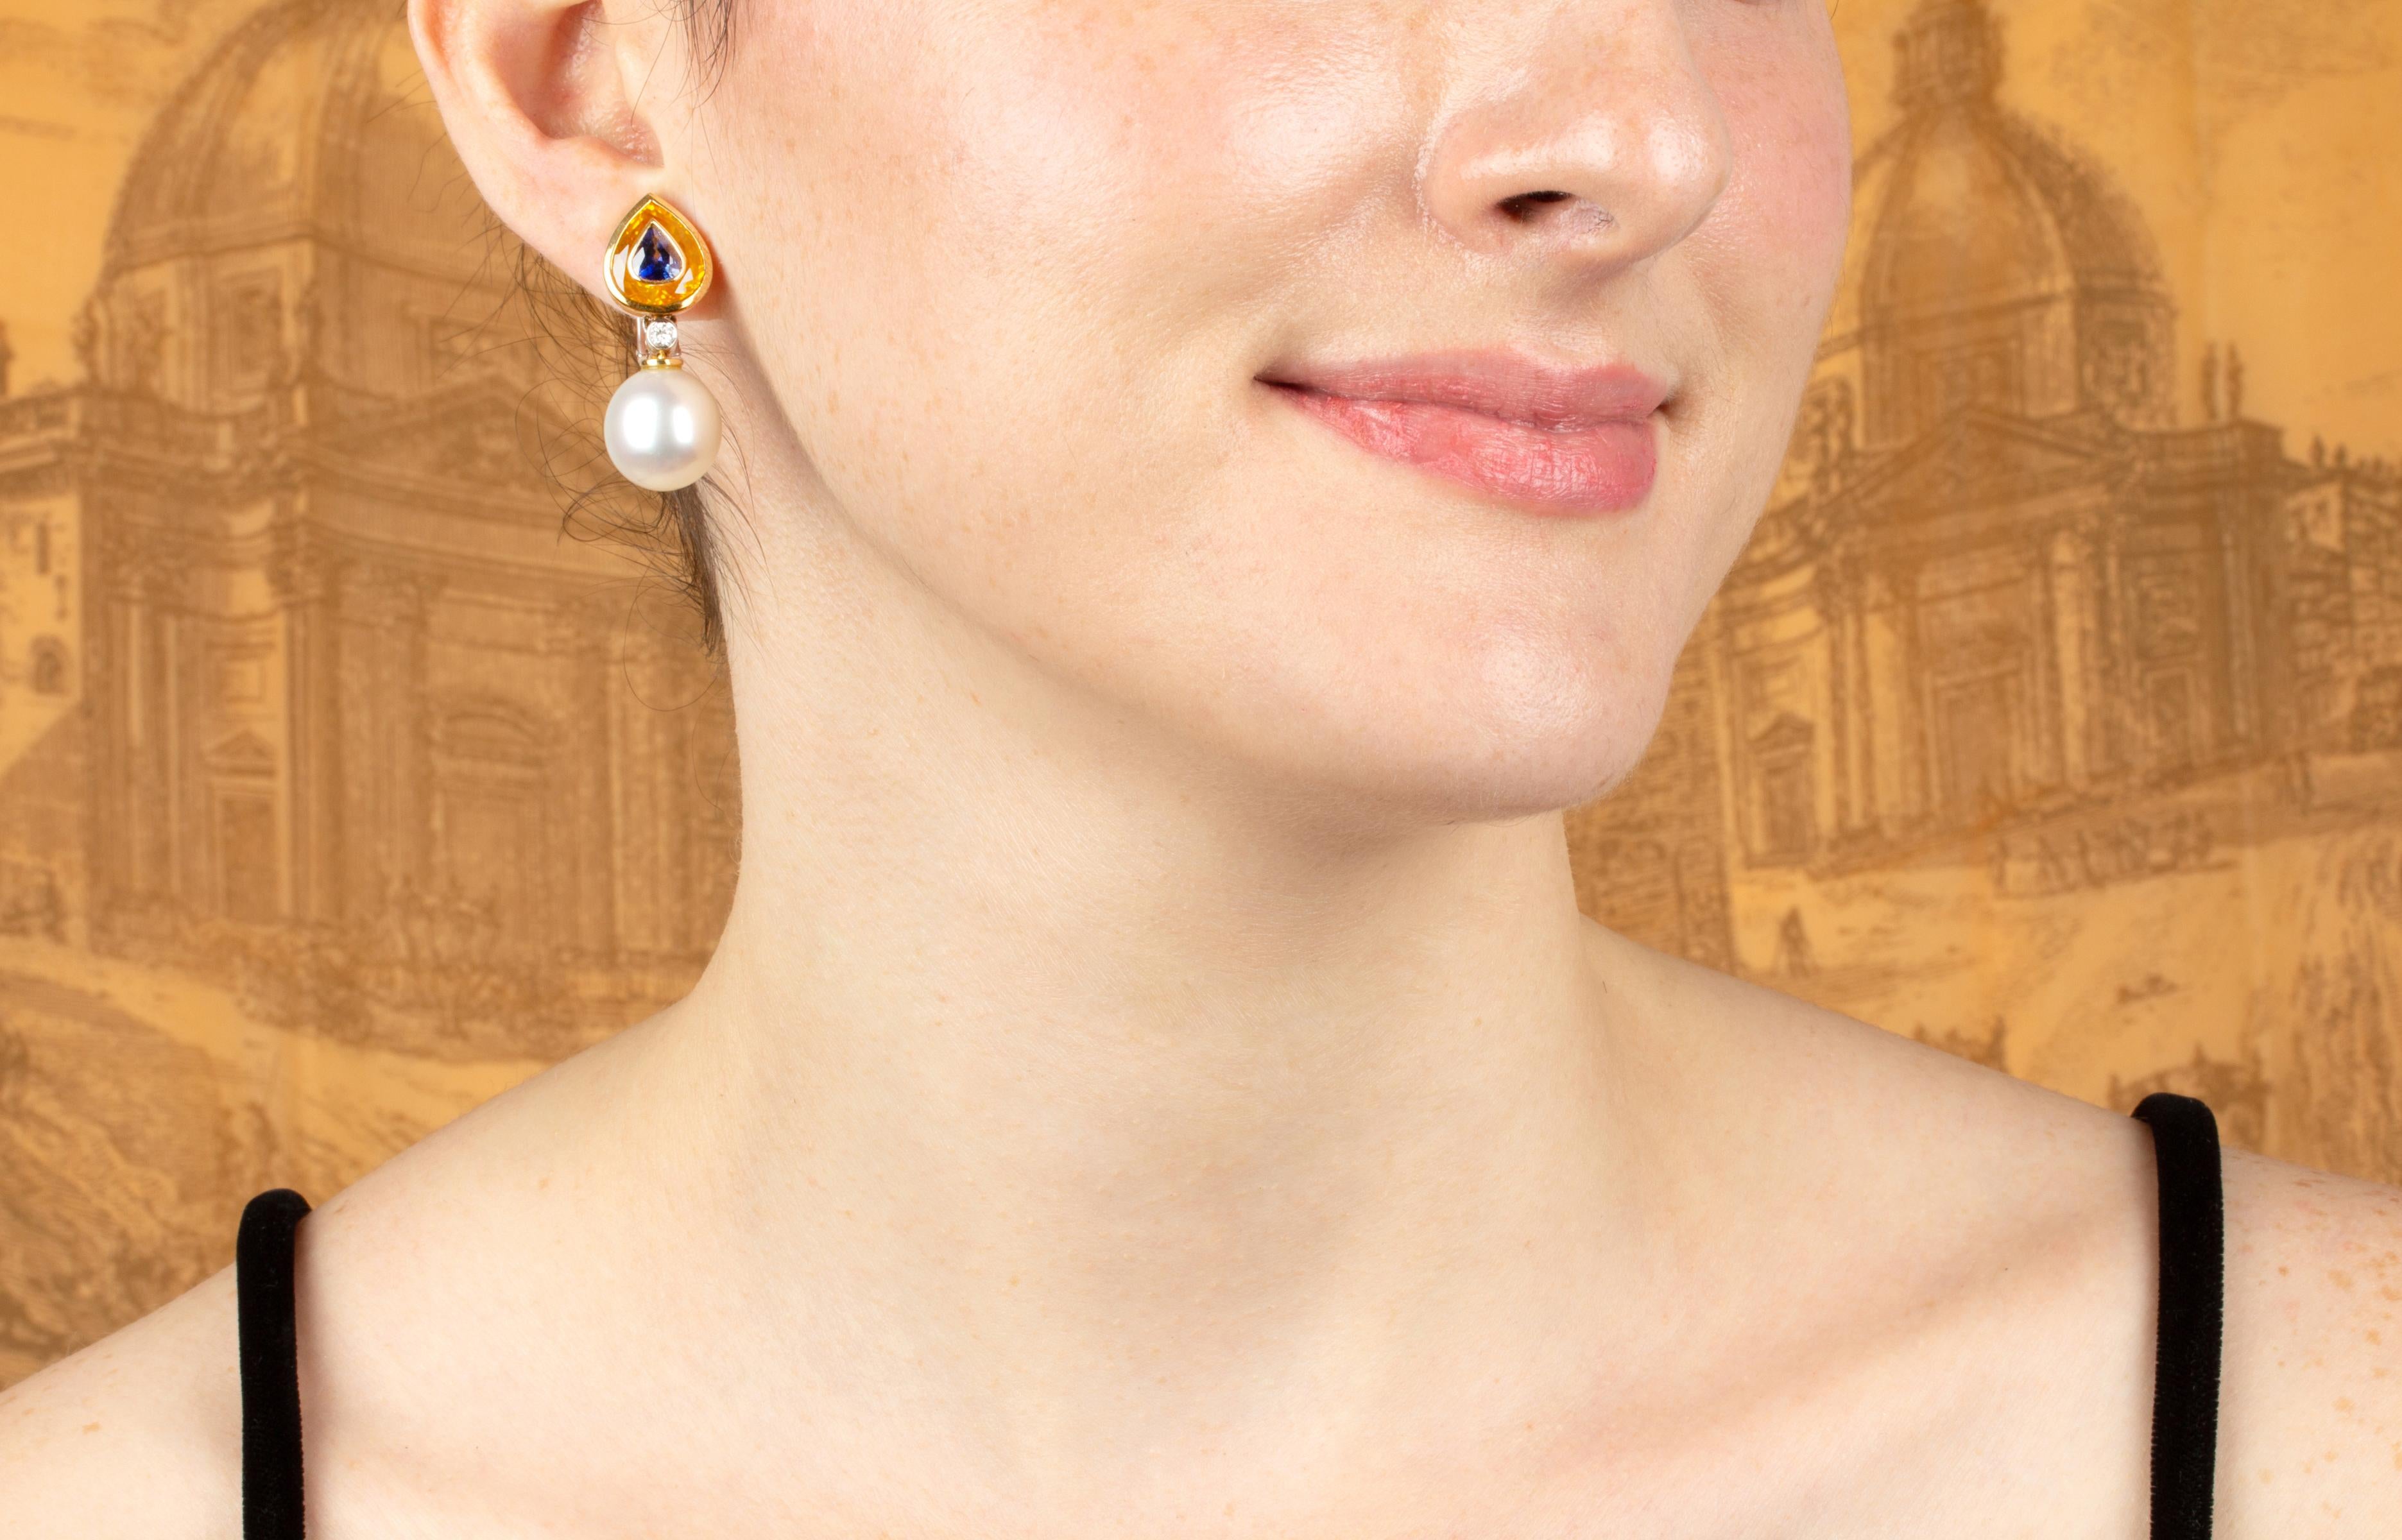 The sapphire and pearl earrings feature two faceted pear shape blue sapphires encrusted into two larger faceted yellow sapphires, a rare technical feat. (Total weight of sapphires is 15.51 carats). The tops suspend –via a round diamond- a pair of